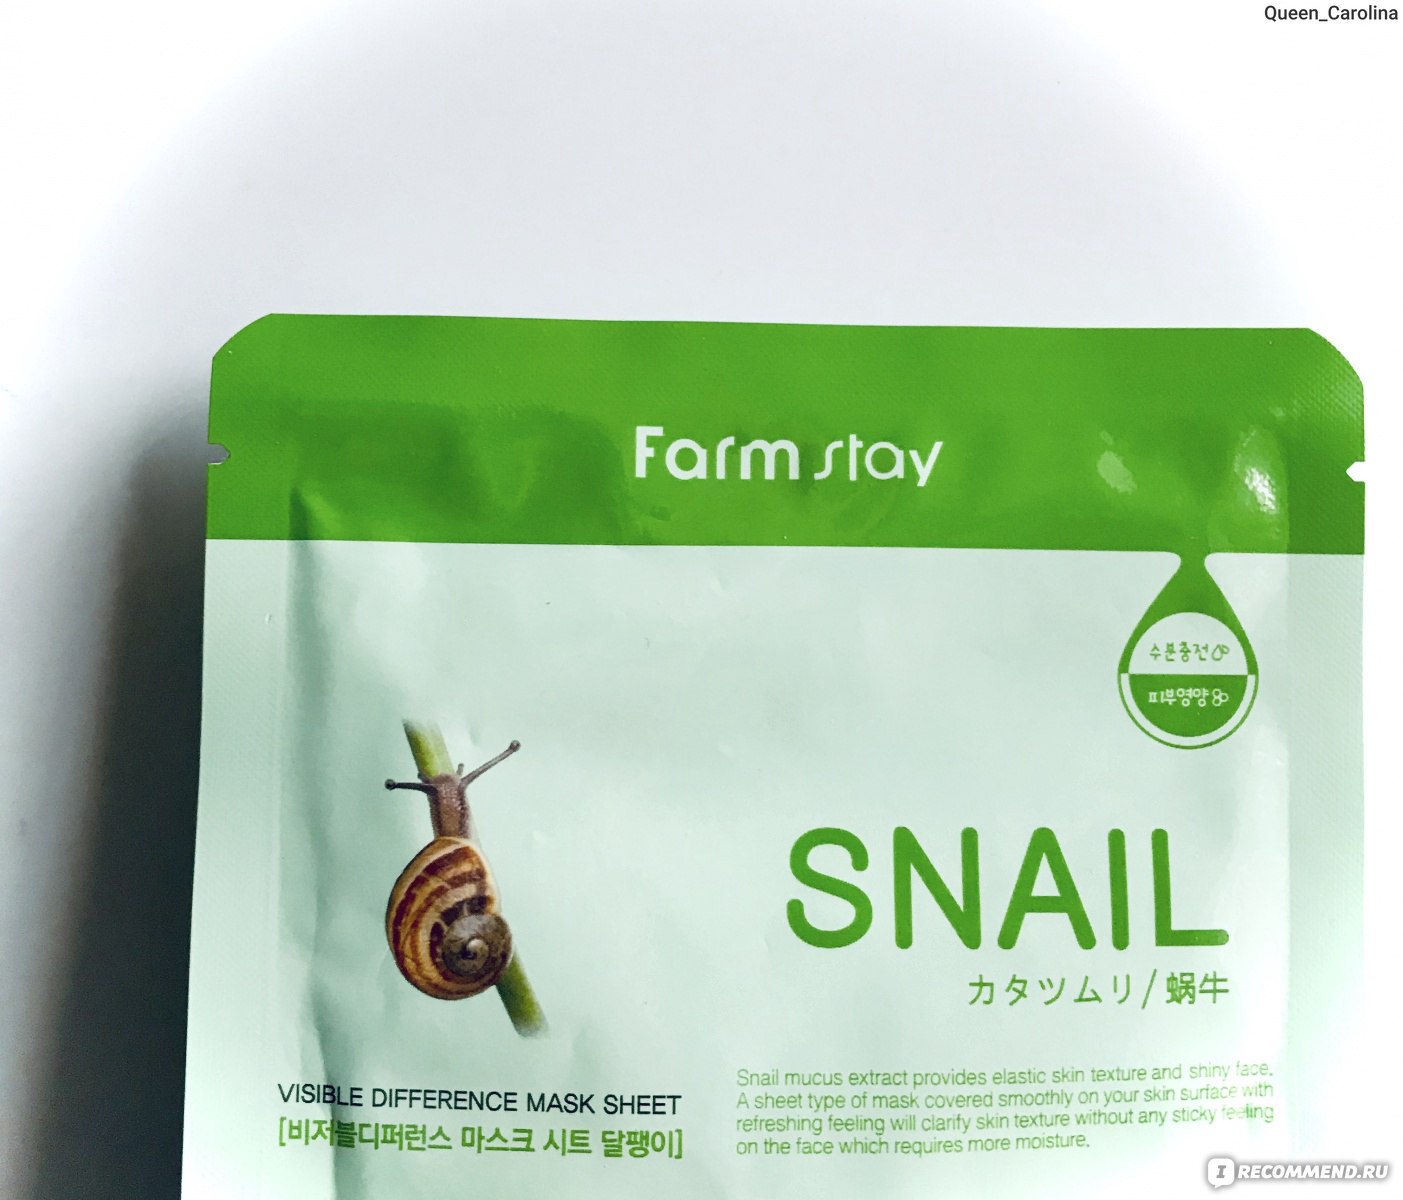 Snail маска улитка. Farmstay visible difference Mask Sheet Snail. Farmstay маска тканевая Farmstay visible difference Mask Sheet Snail 23мл. Тканевая маска - улитка visible difference Mask Sheet - Snail 1 шт.. 12. Farmstay visible difference Mask Sheet Snail – маска тканевая с экстрактом улитки.